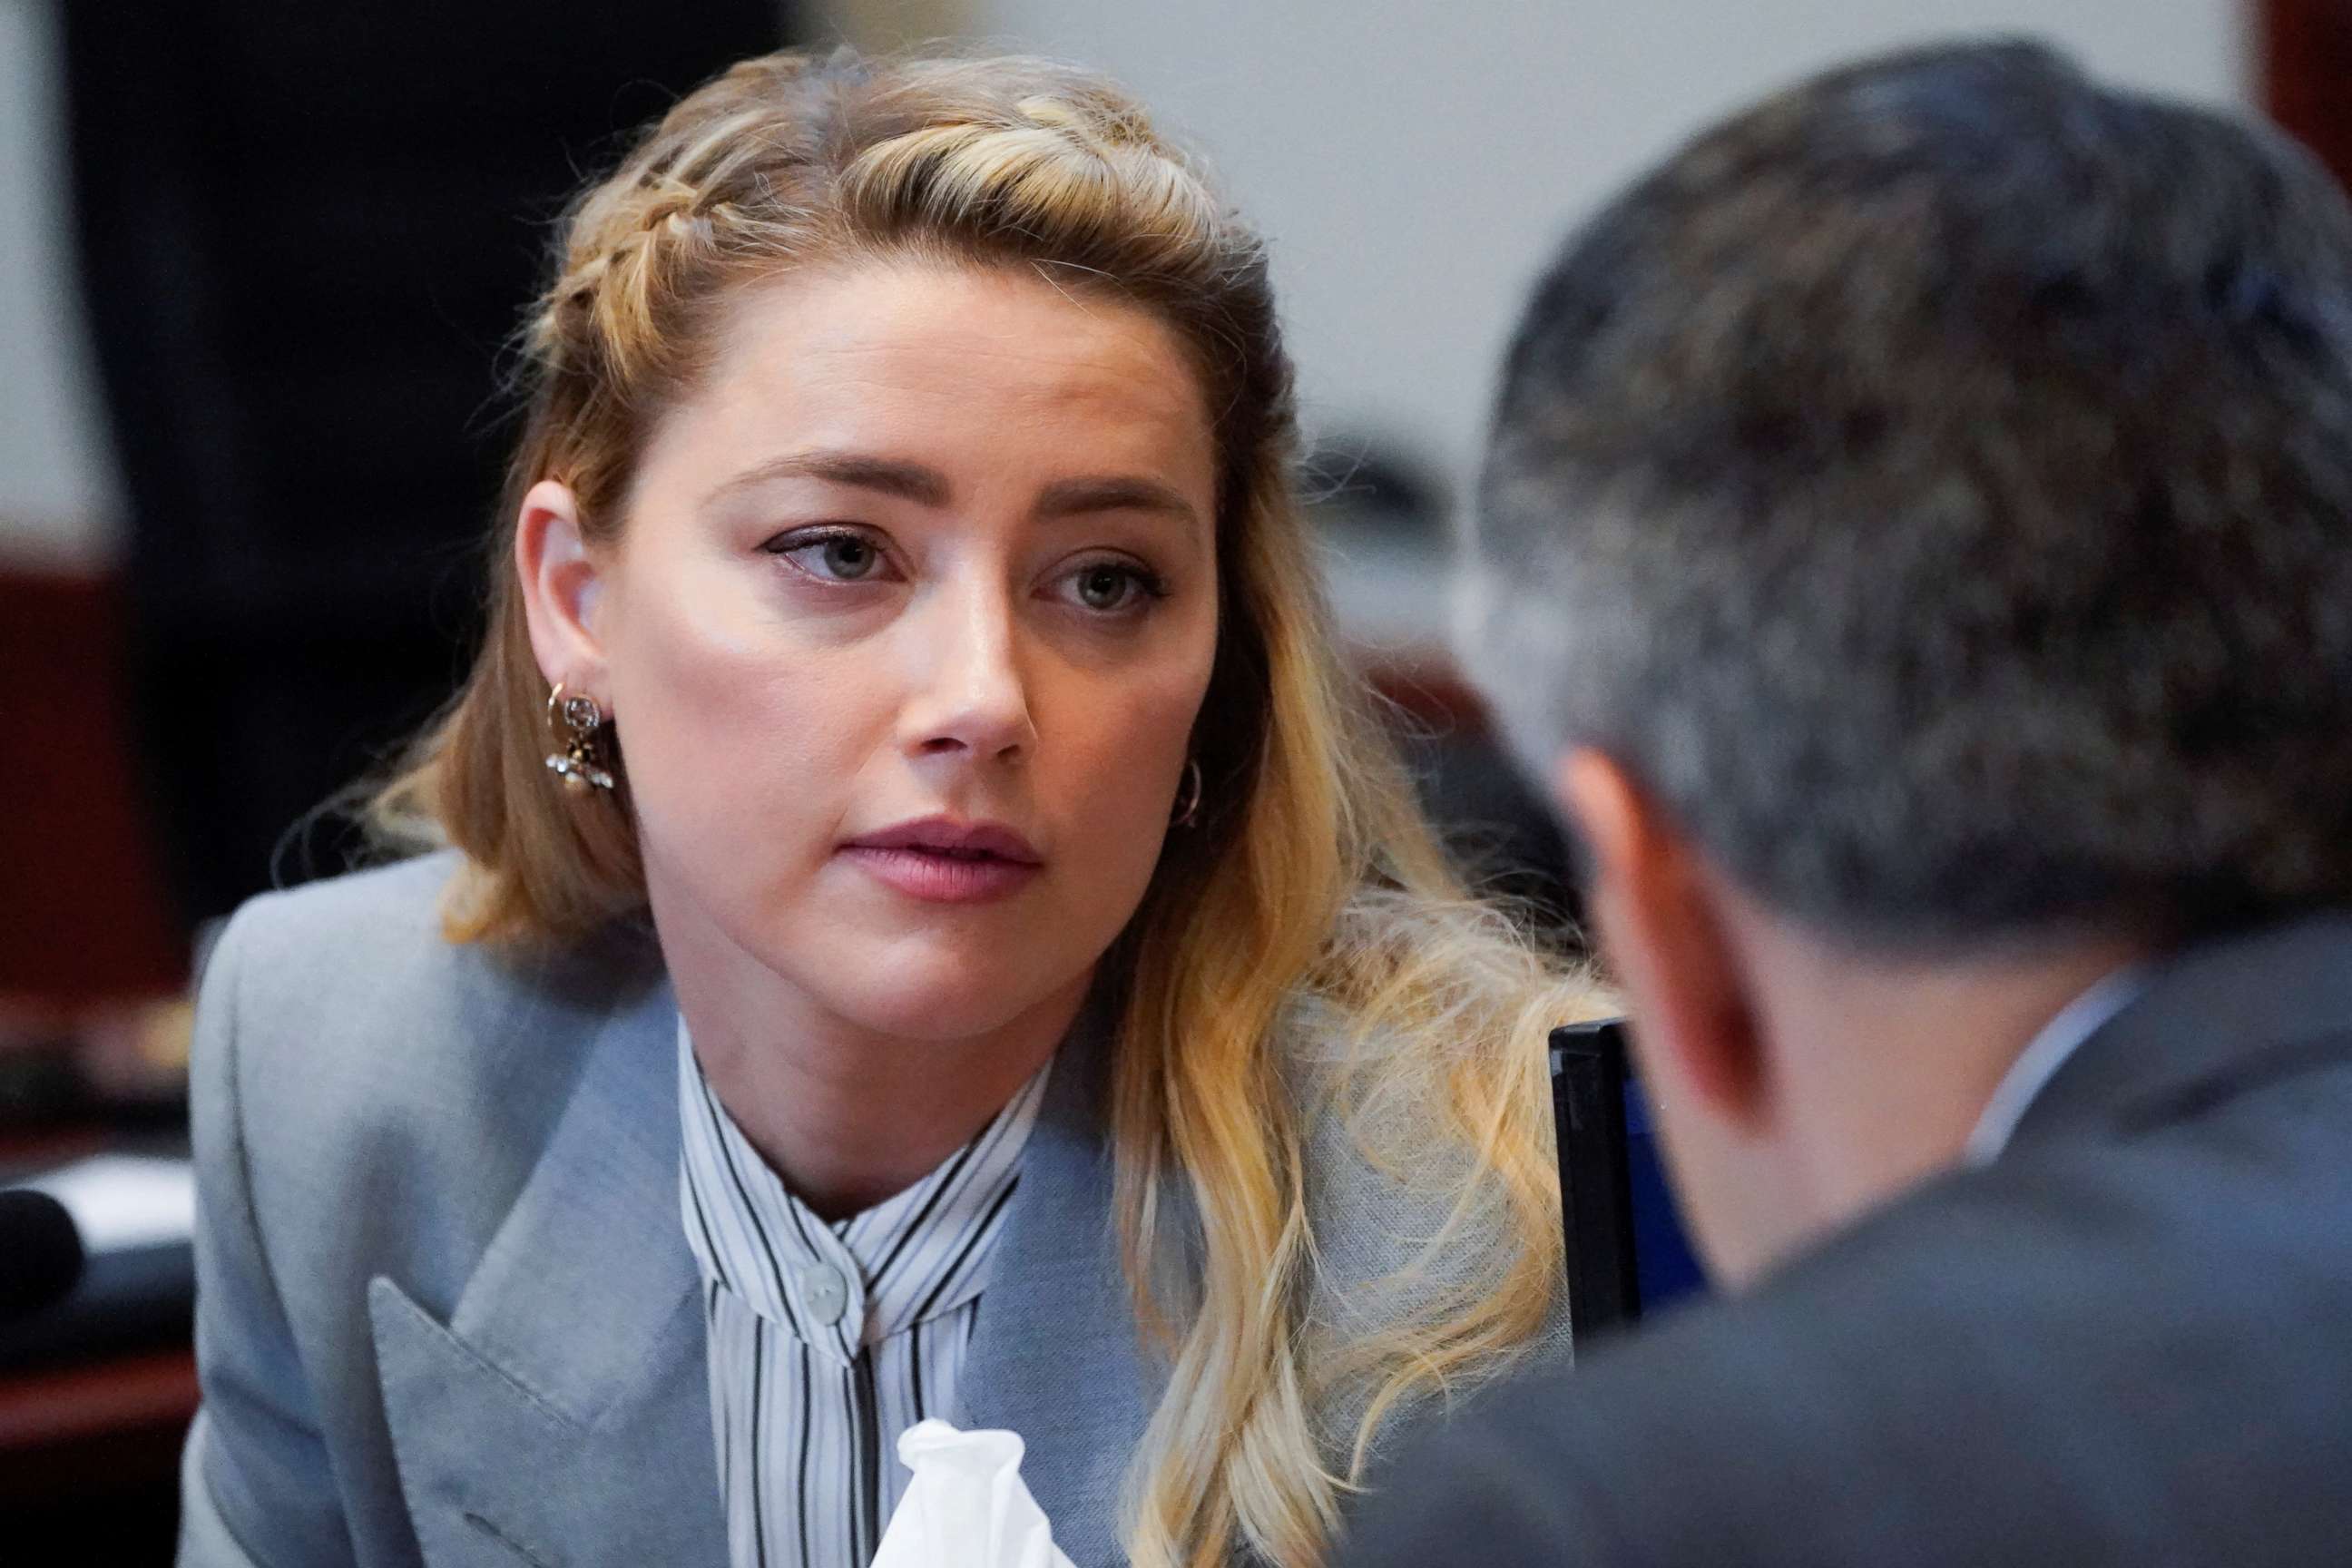 PHOTO: Actor Amber Heard talks with her legal team in the courtroom during ex-husband Johnny Depp's defamation case against her at the Fairfax County Circuit Courthouse in Fairfax, Va., May 27, 2022.